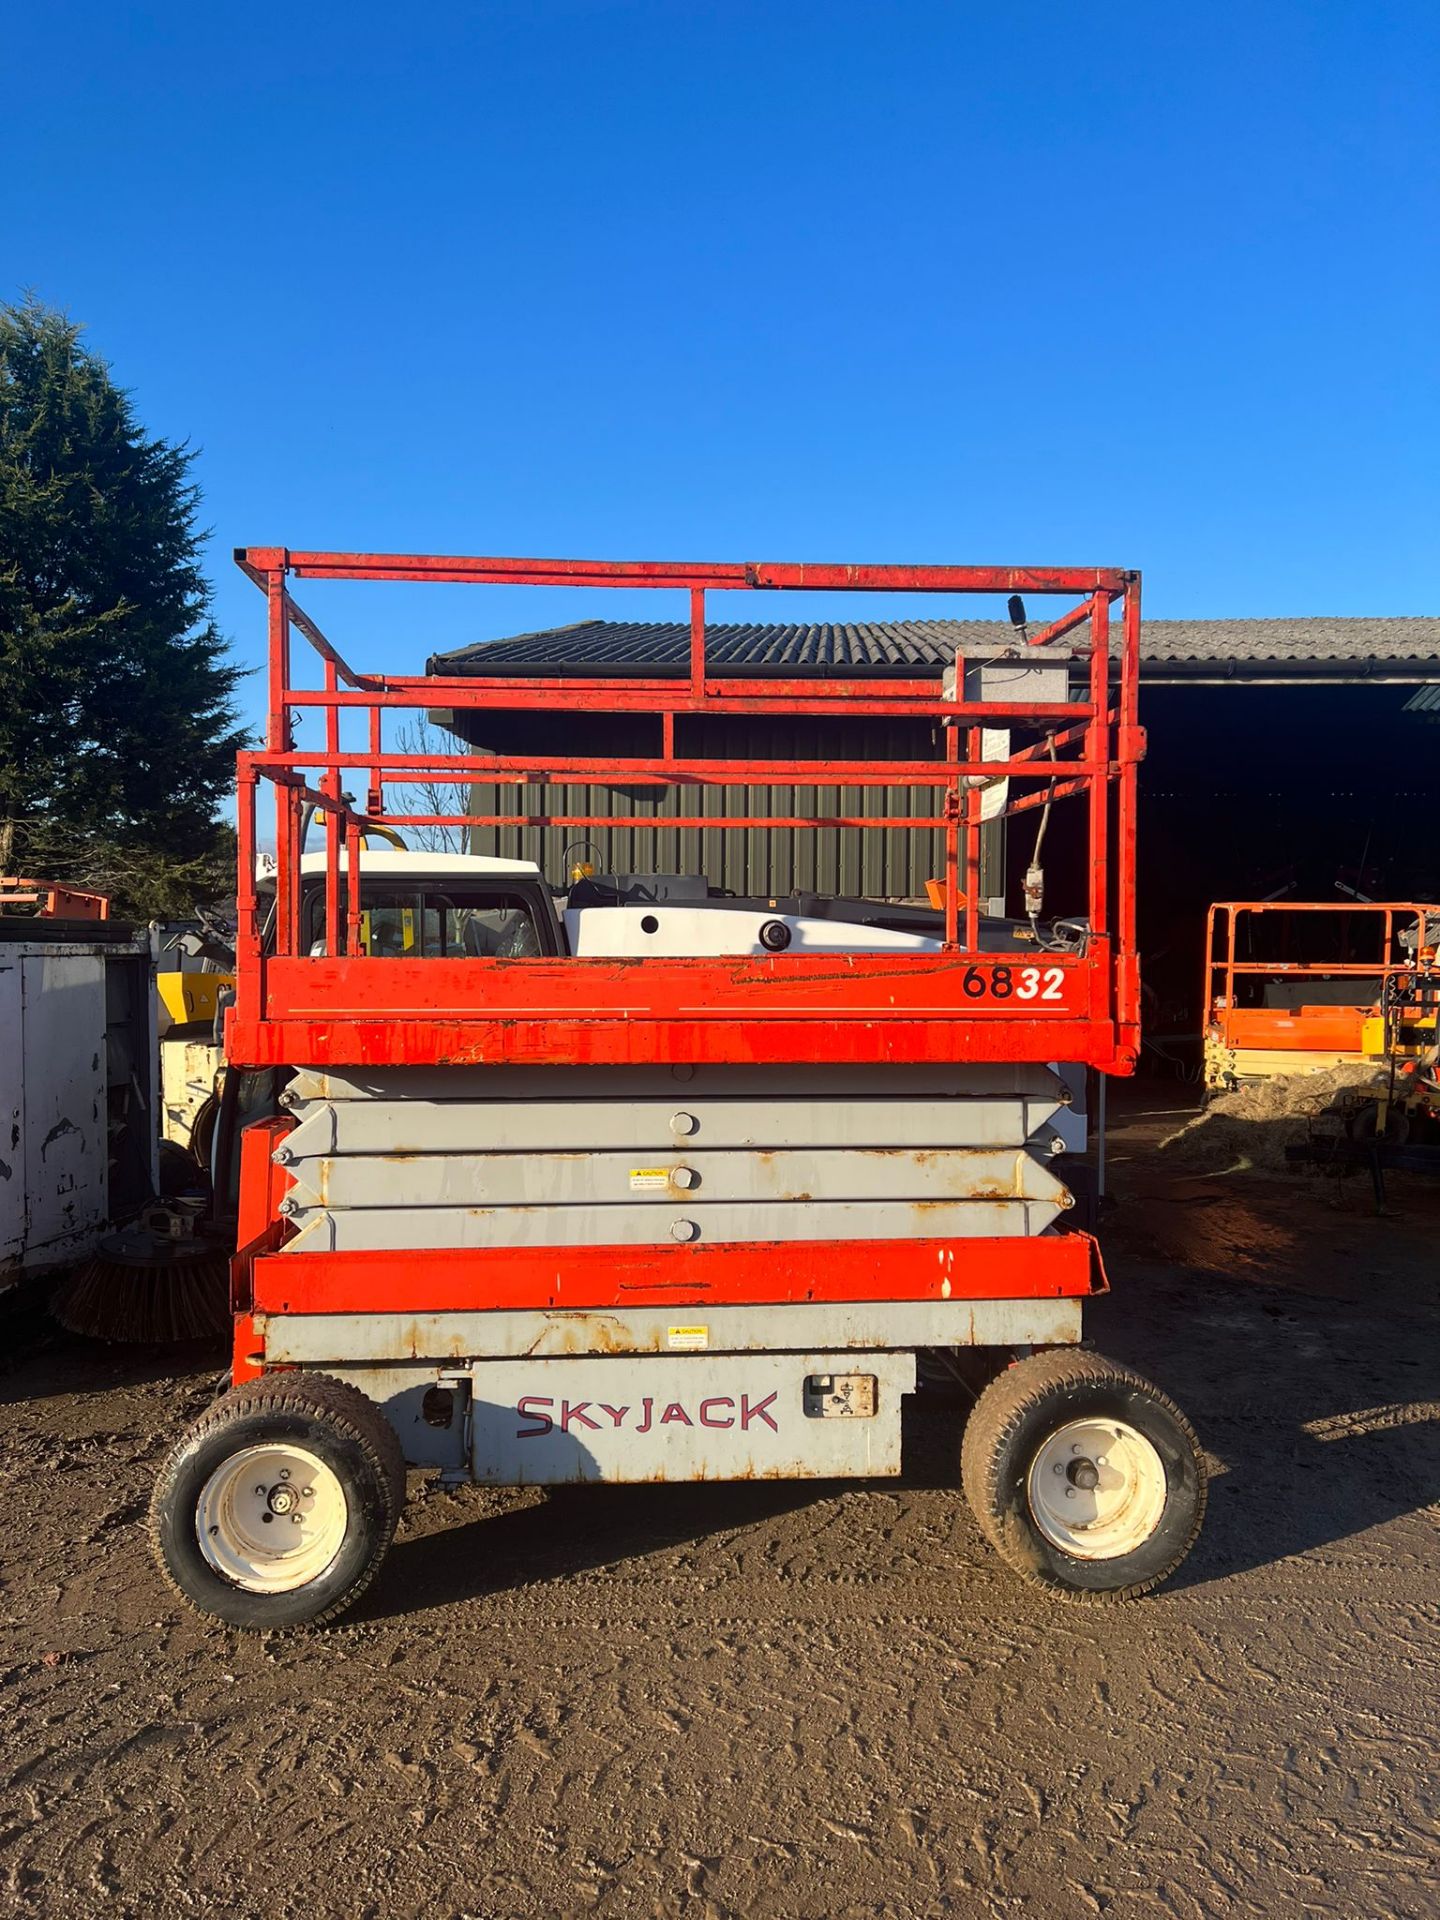 SKYJACK SJ832 SCISSOR LIFT, 10 METRE WORKING HEIGHT, 350 RECORDED HOURS, DRIVES AND LIFTS *NO VAT* - Image 3 of 5